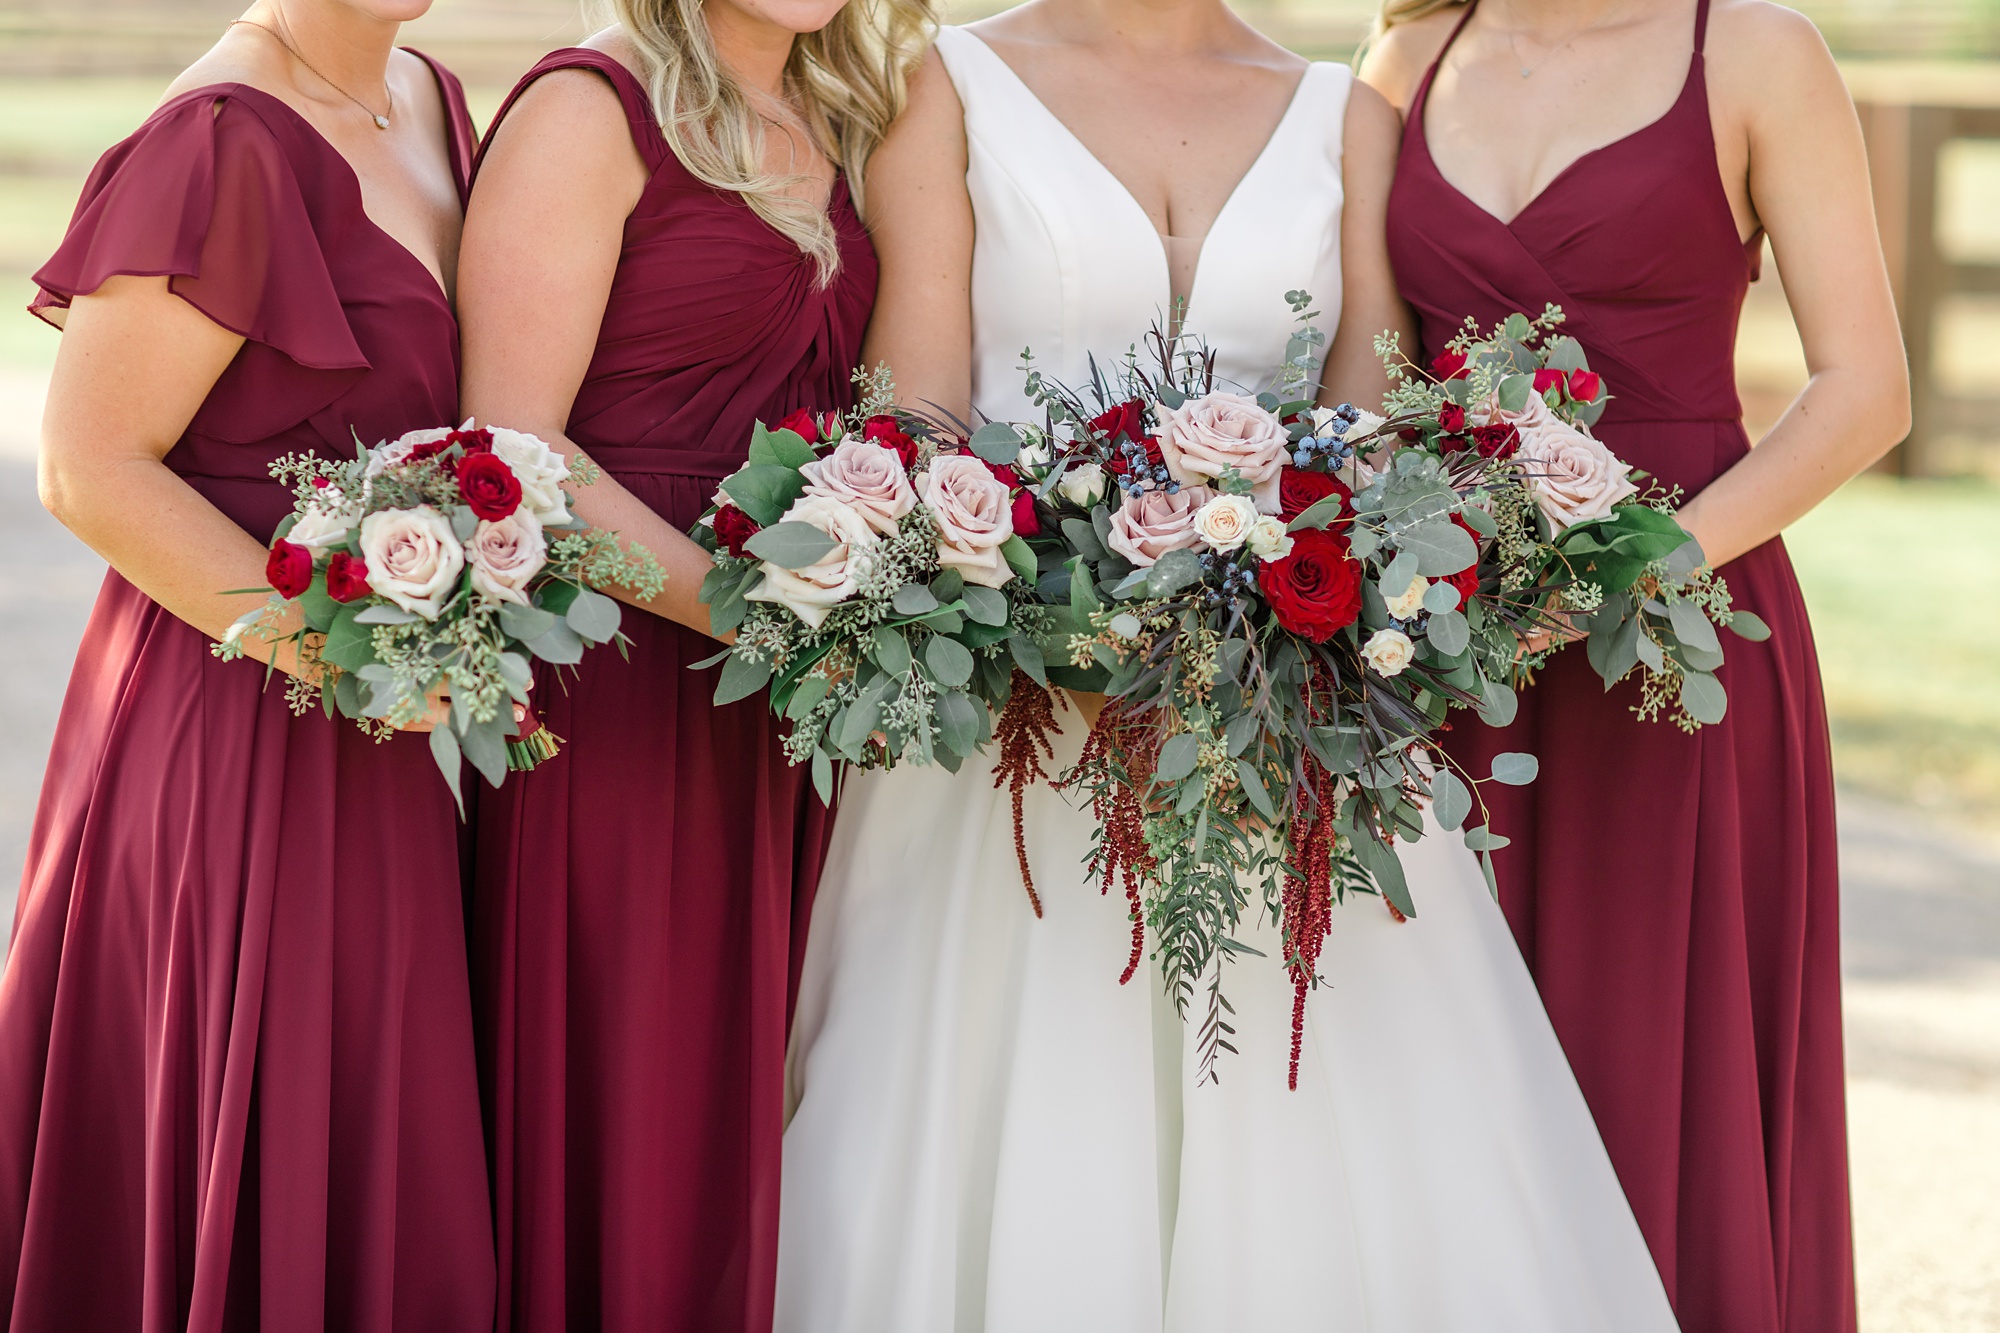 bride poses with bridesmaids in red gowns